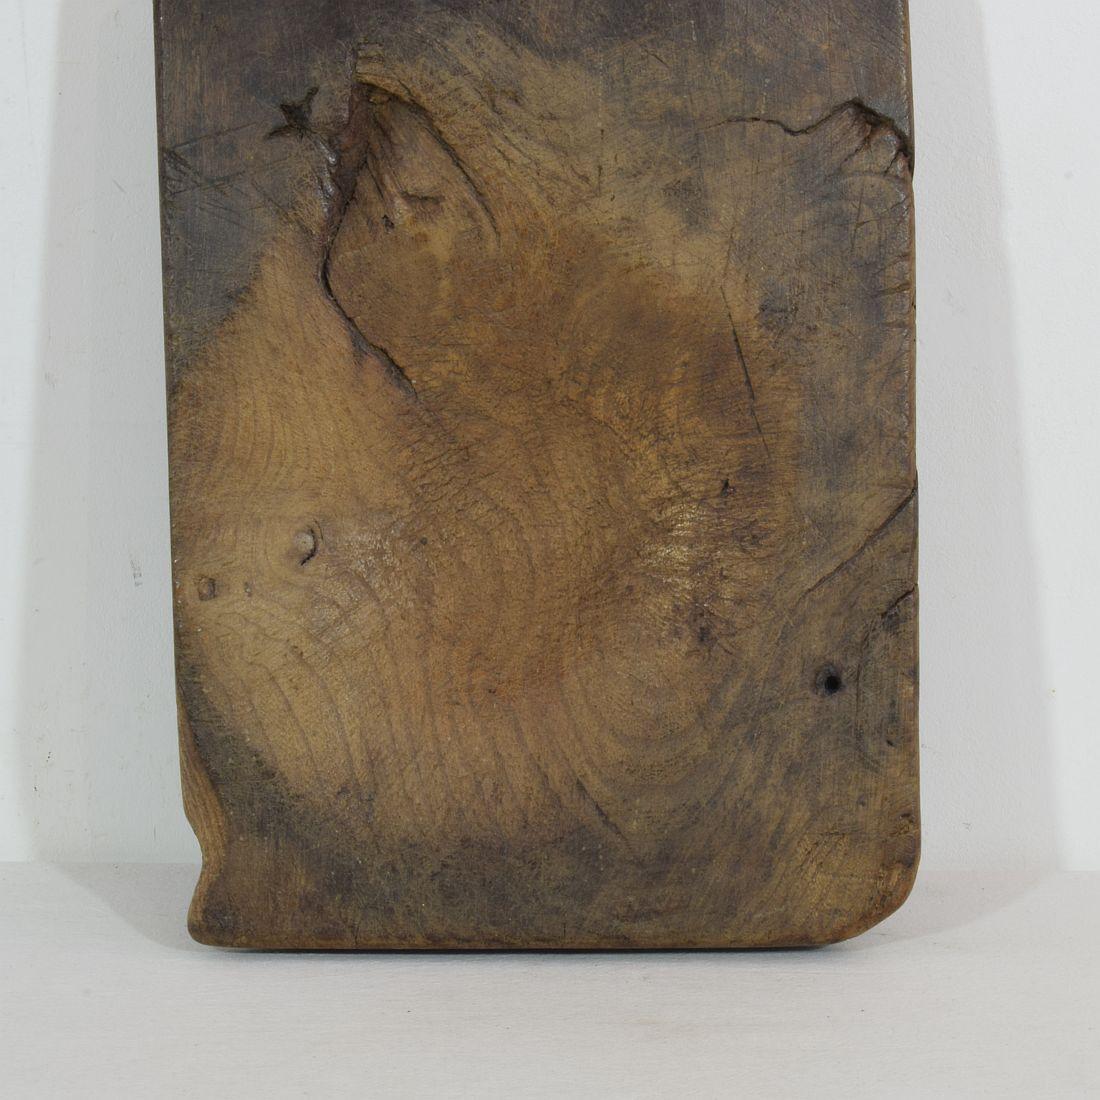 French 19th Century, Wooden Chopping or Cutting Board 7